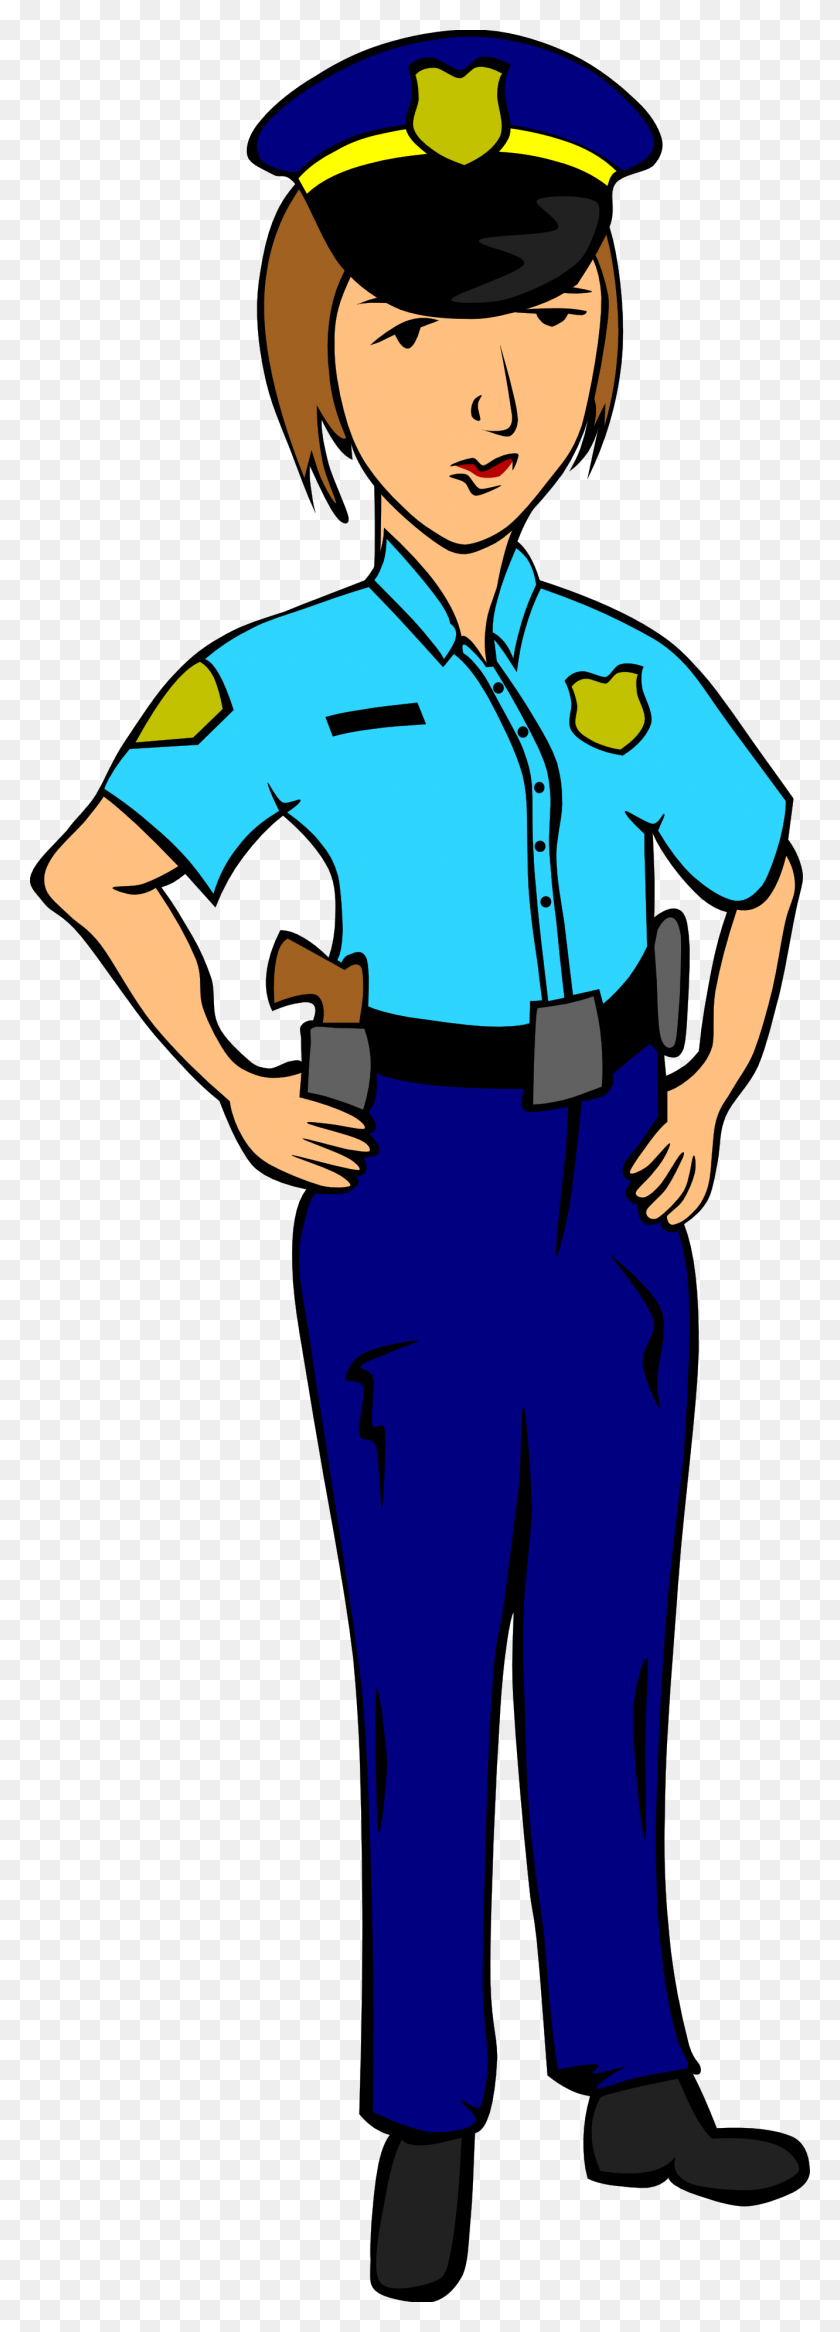 1331x3878 Female Police Officer Clipart - Steph Curry Clipart